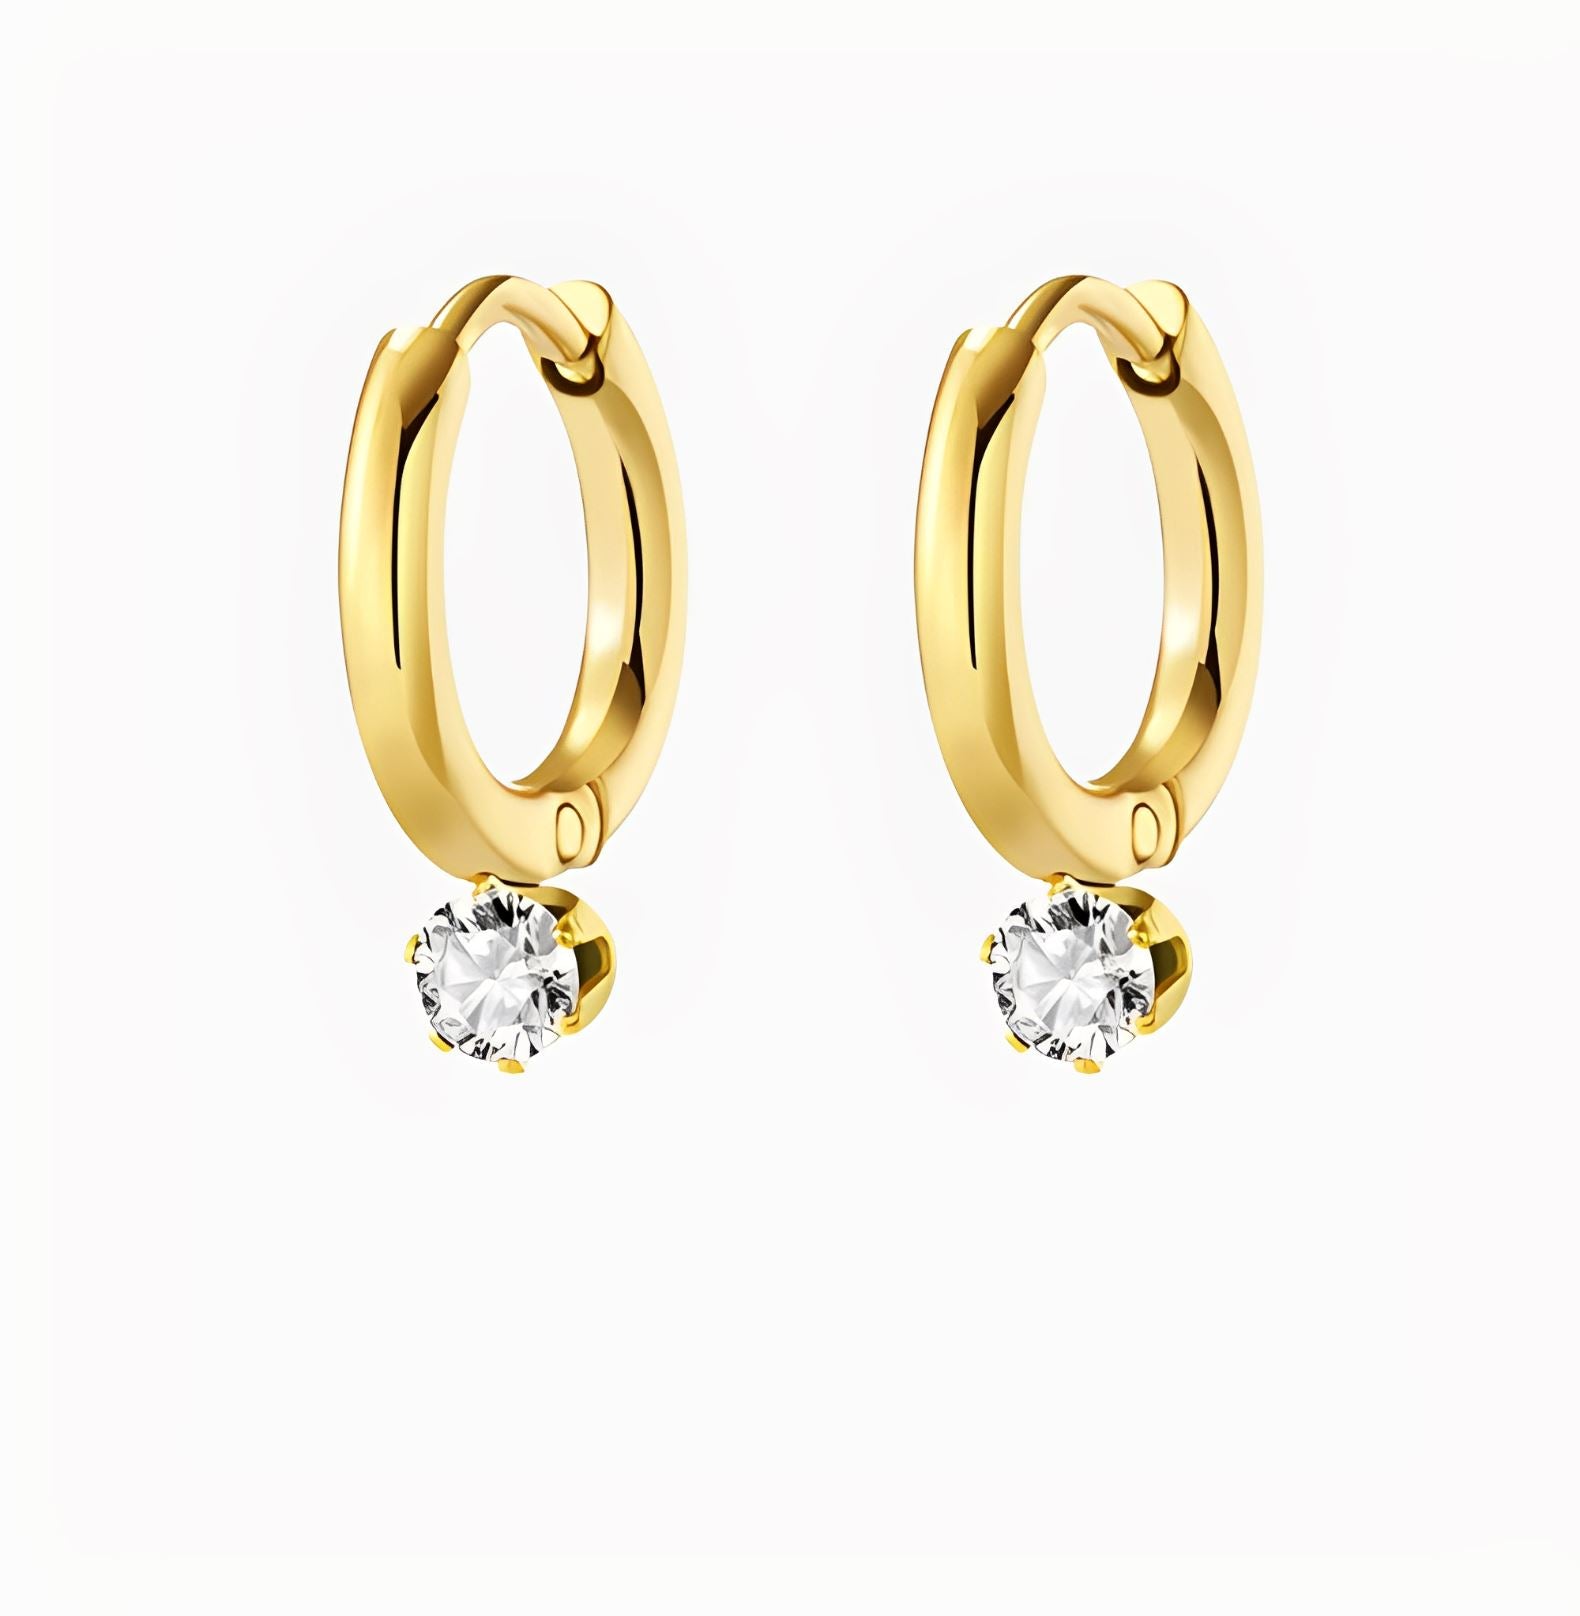 MINERO MINI HOOP EARRINGS earing Yubama Jewelry Online Store - The Elegant Designs of Gold and Silver ! White zircon 